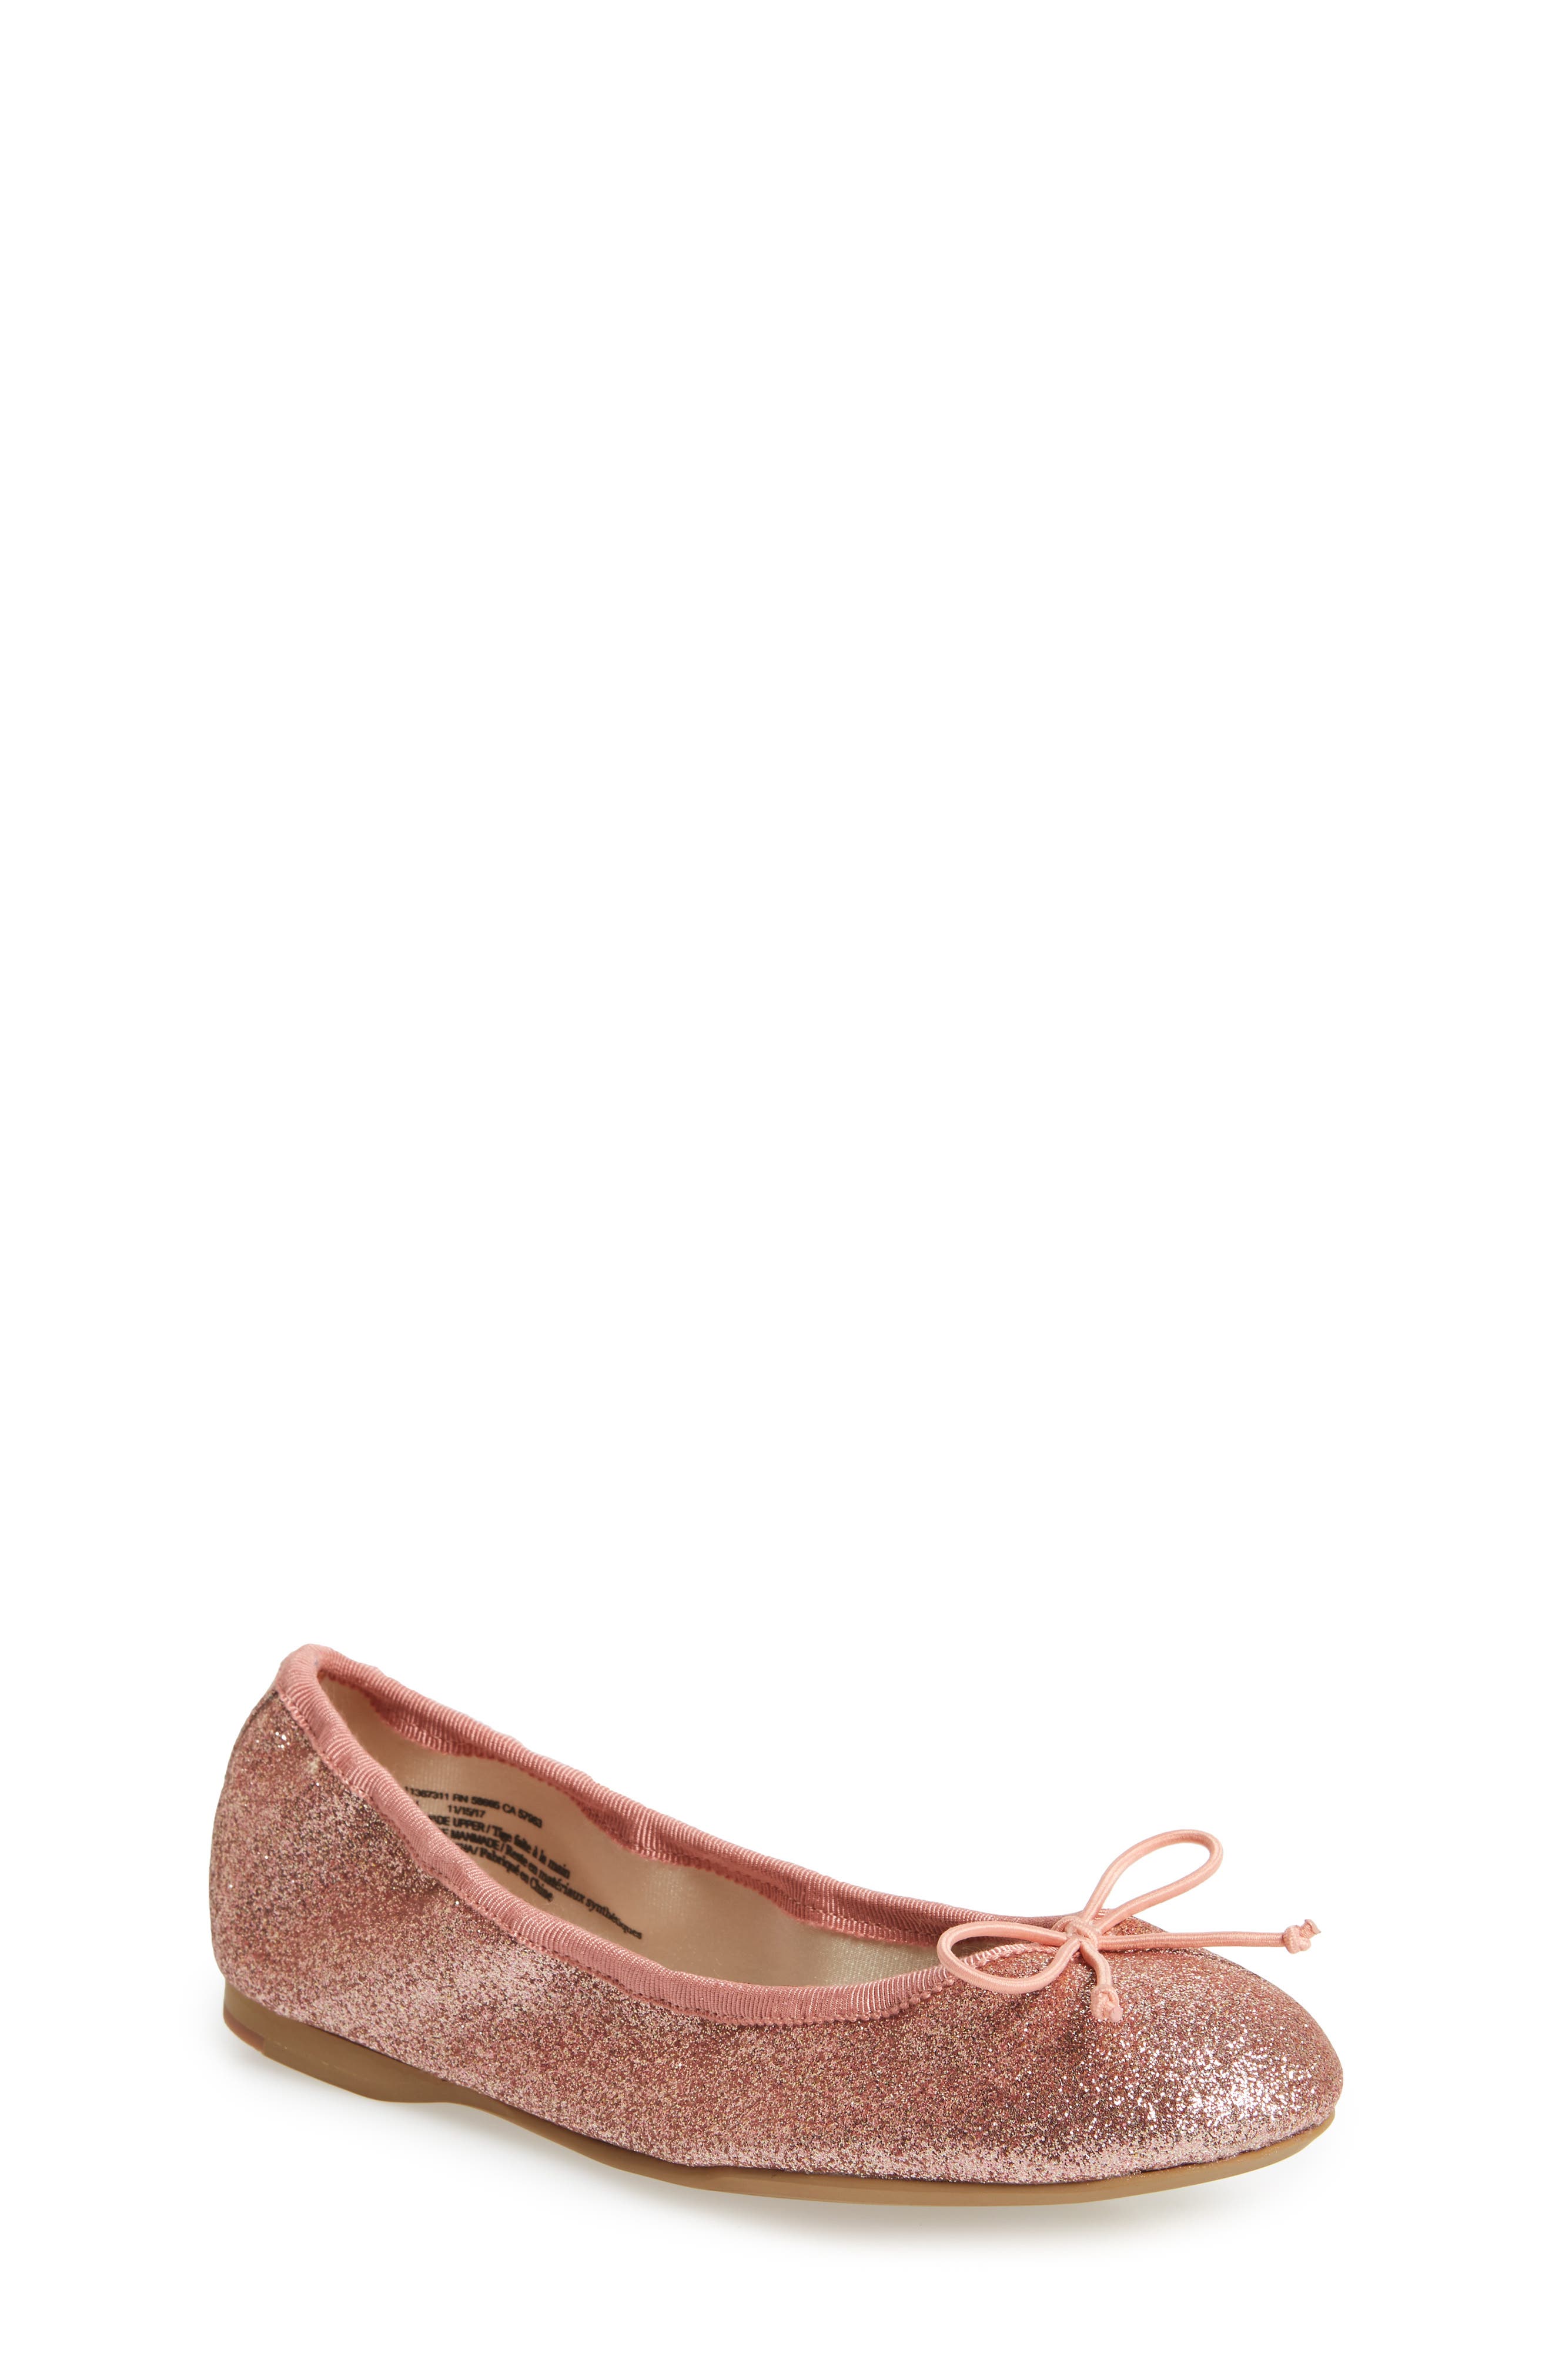 ruby and bloom ballet flats